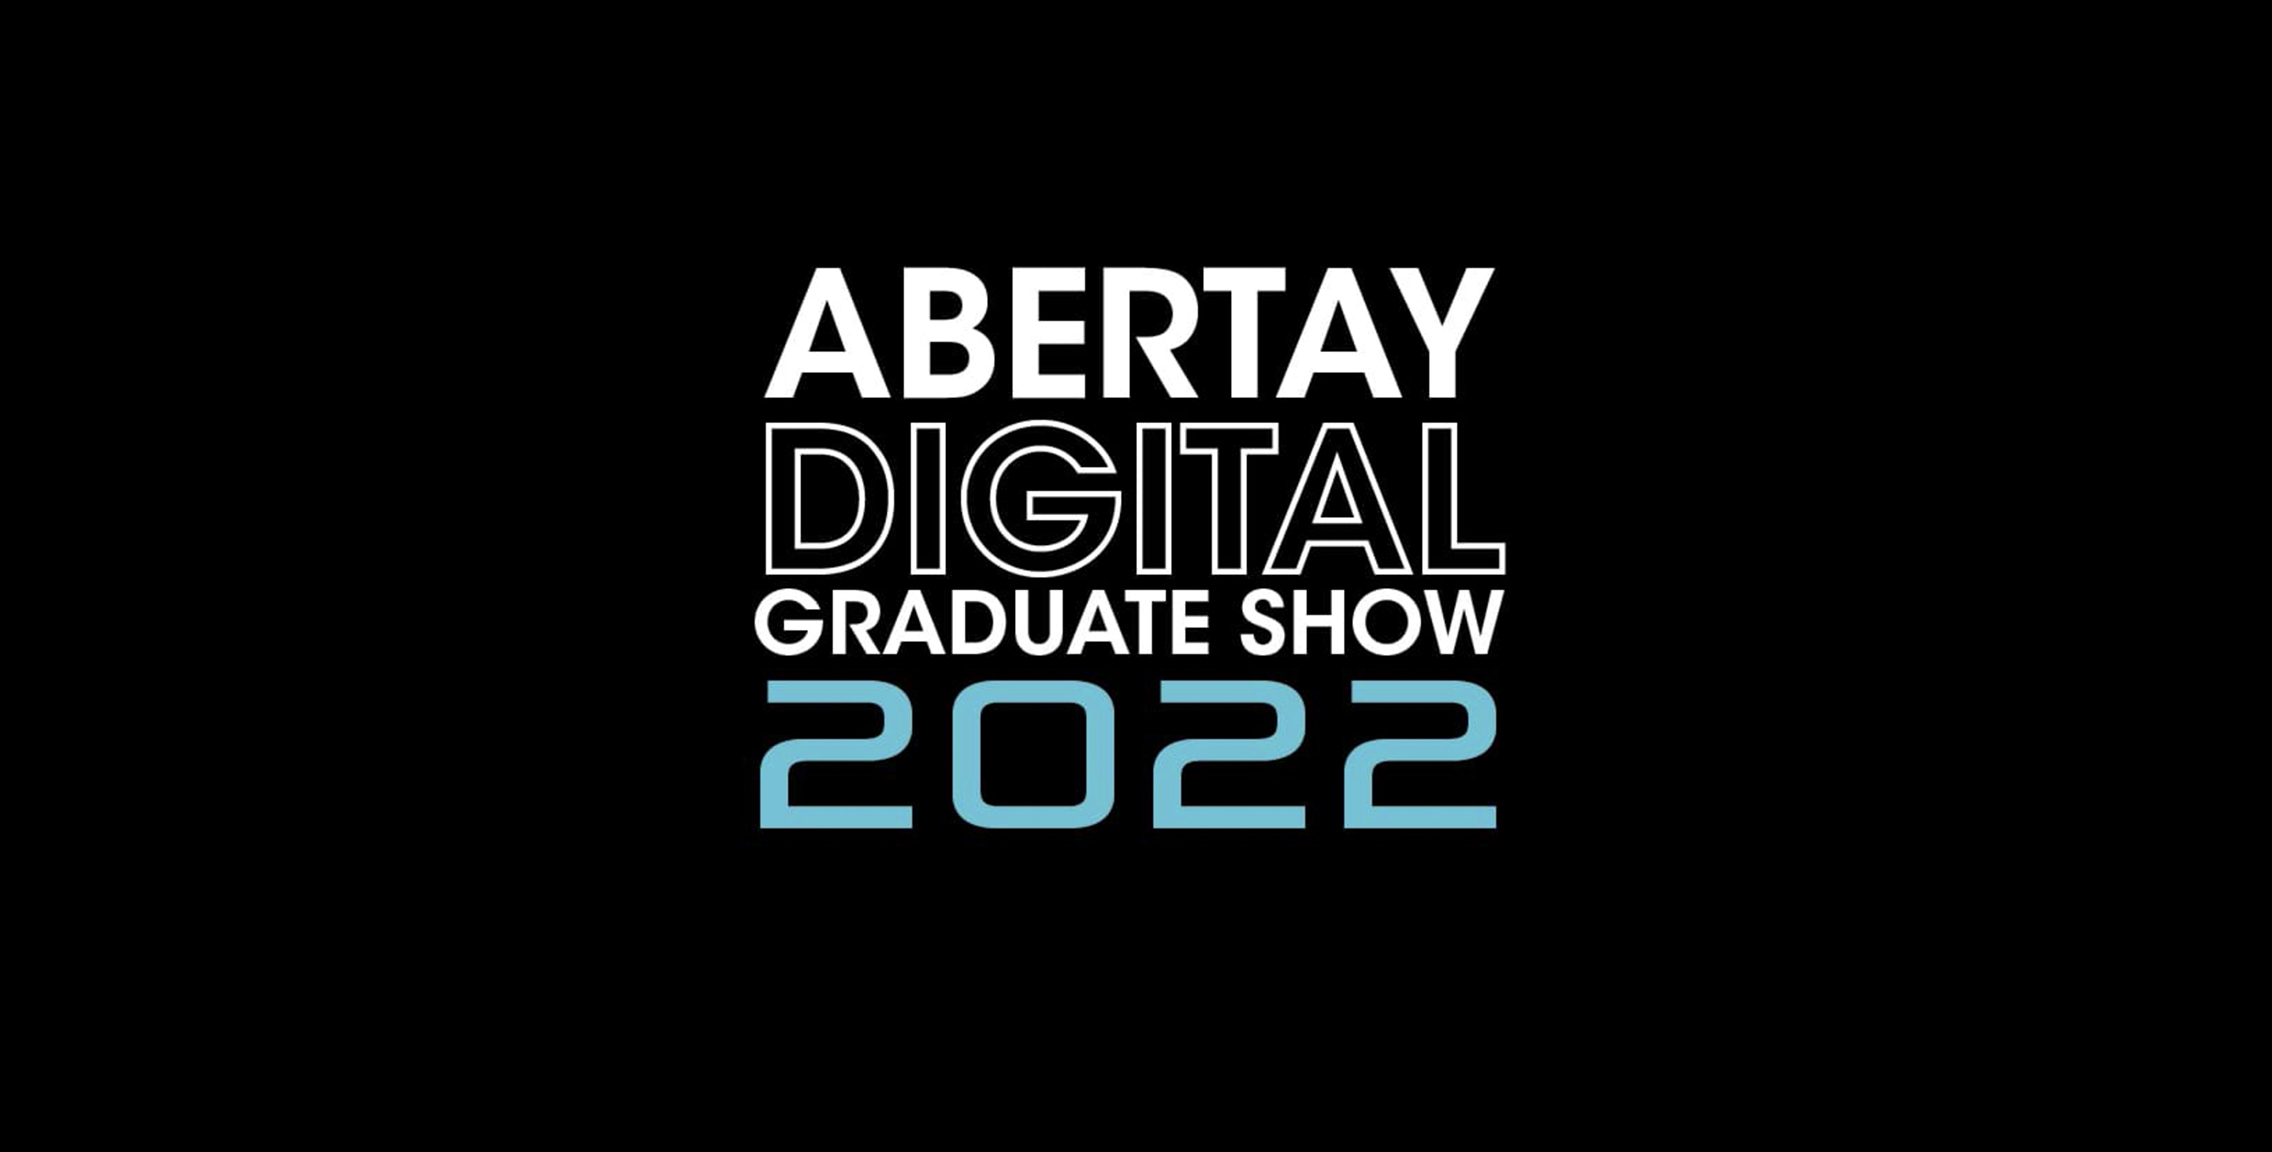 What's on at Abertay Digital Graduate Show?